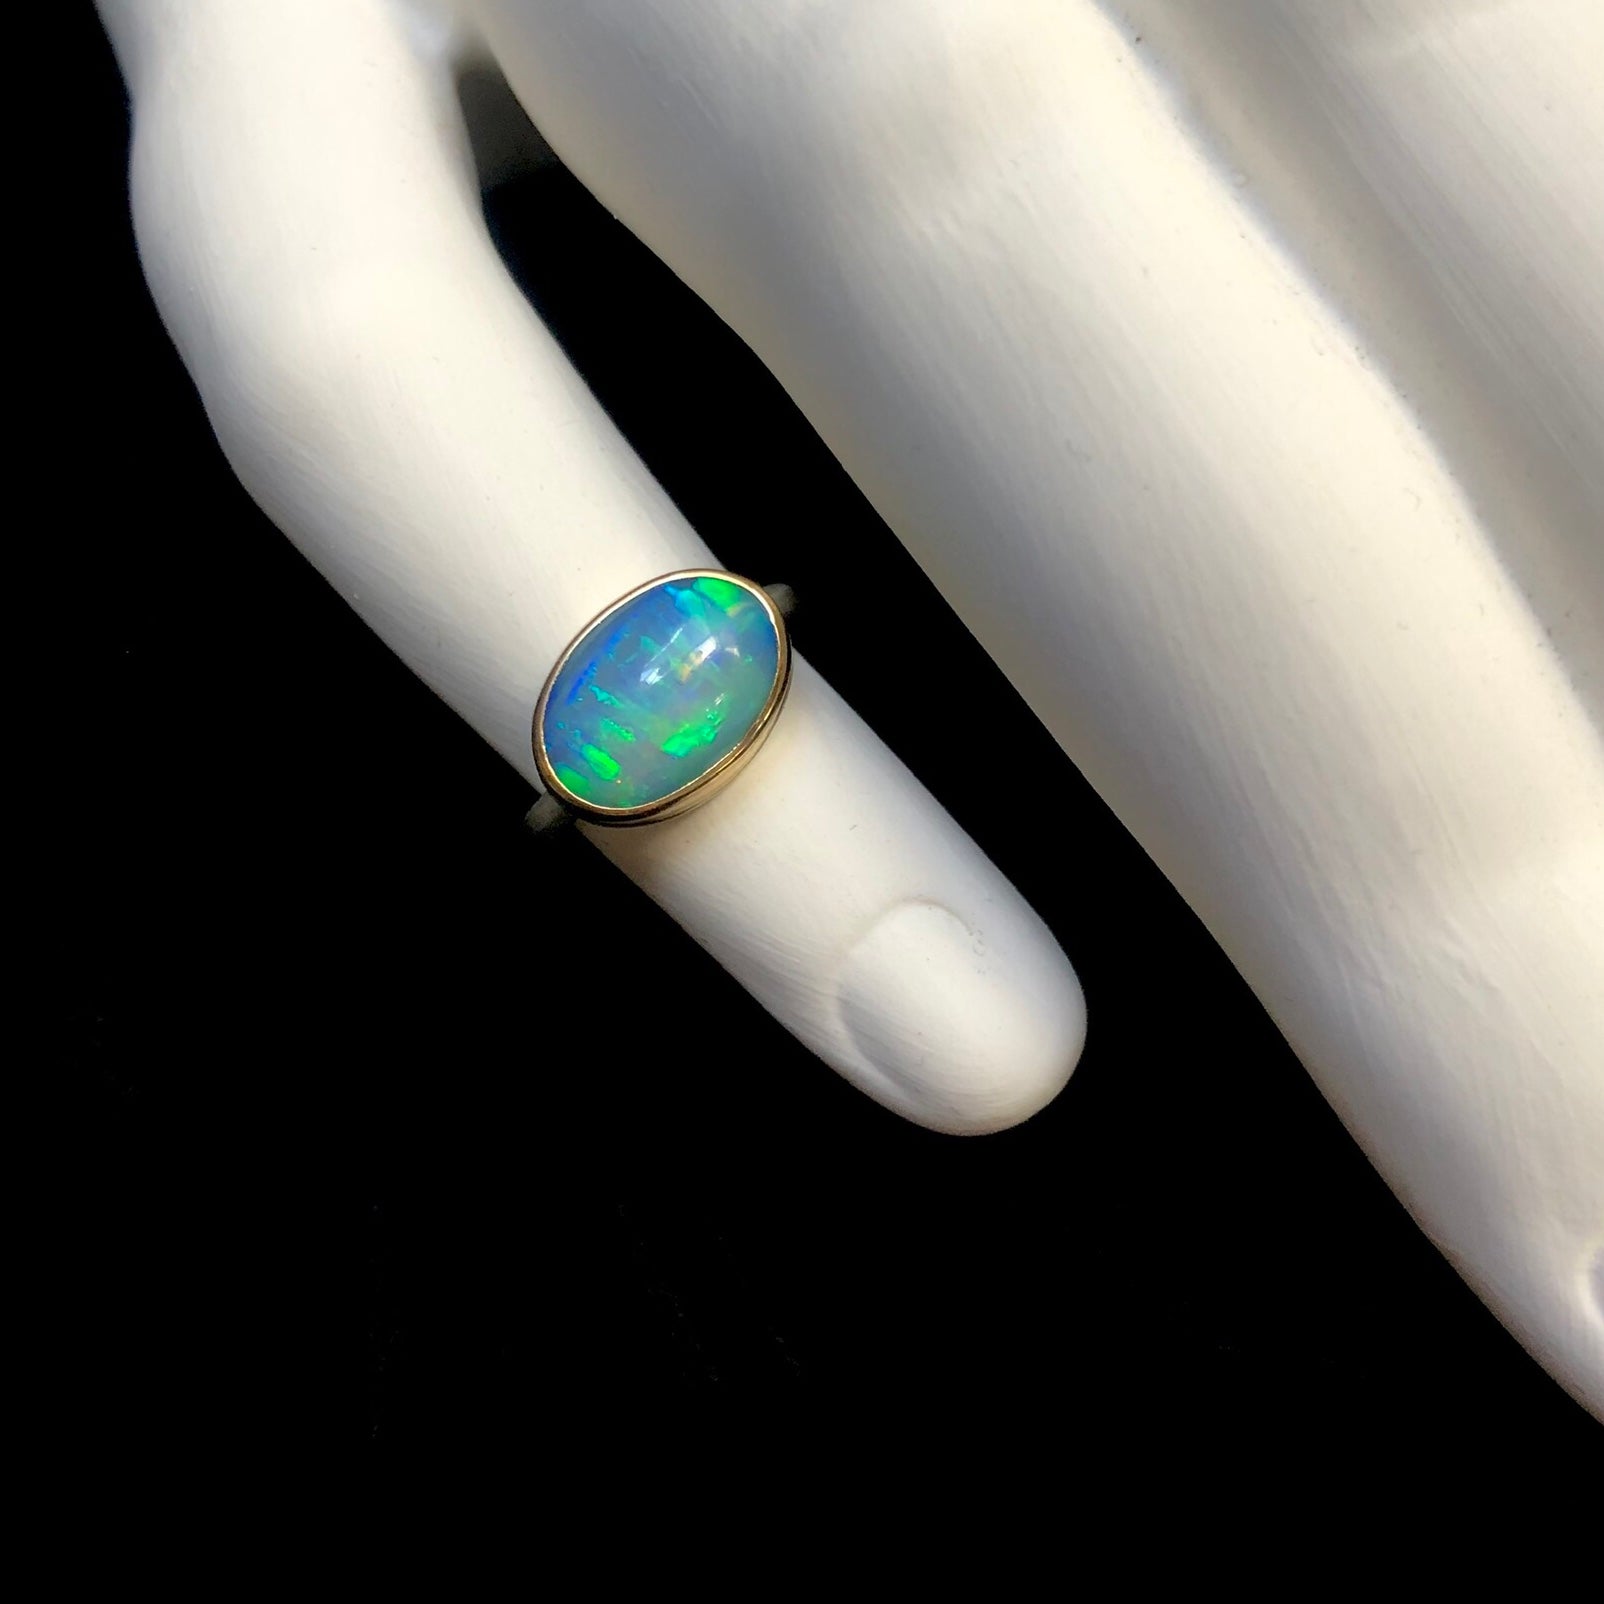 Oval shaped blue and green opal stone ring shown on white ceramic hand